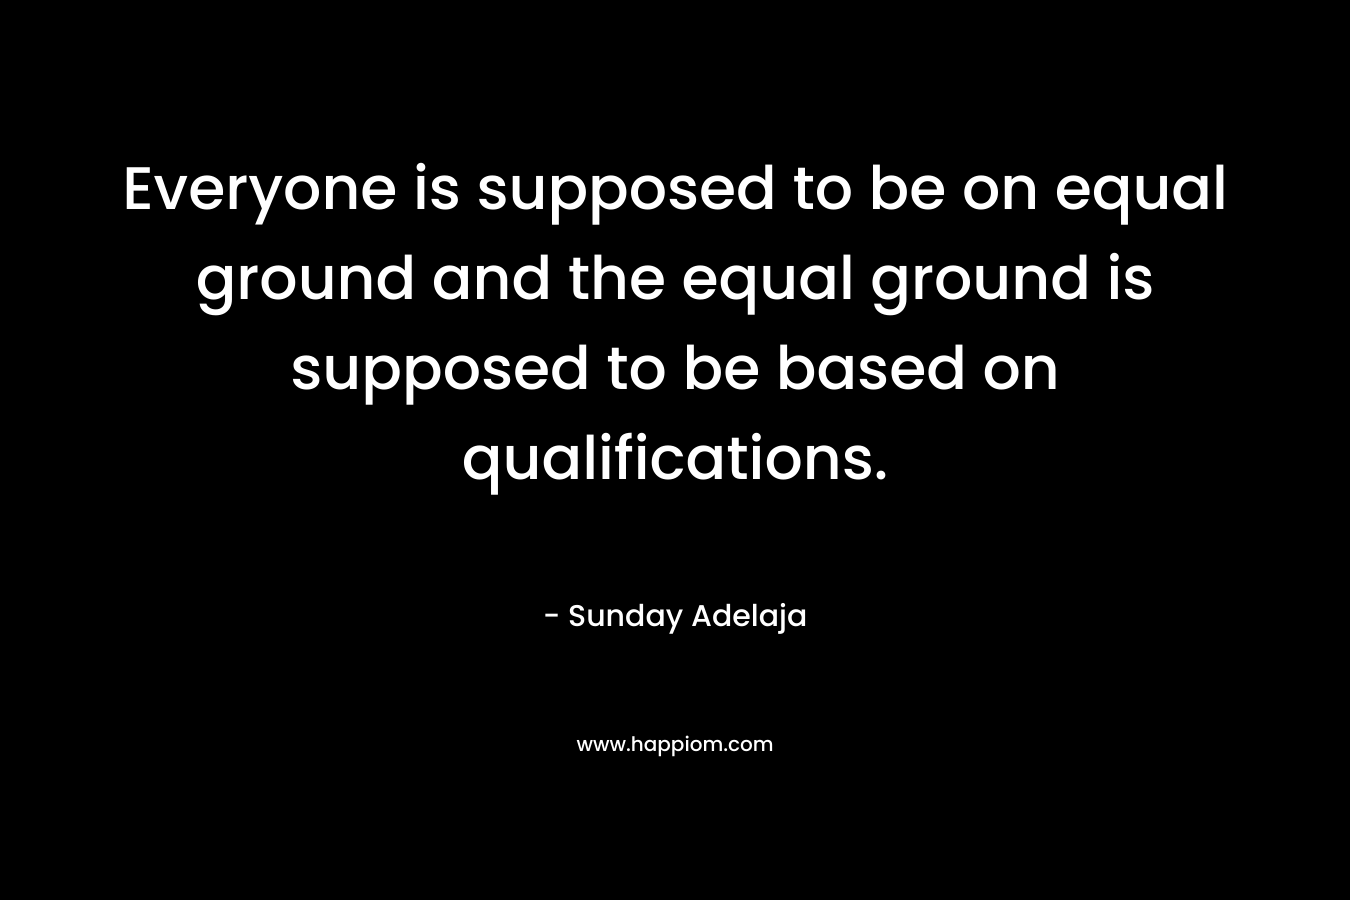 Everyone is supposed to be on equal ground and the equal ground is supposed to be based on qualifications.